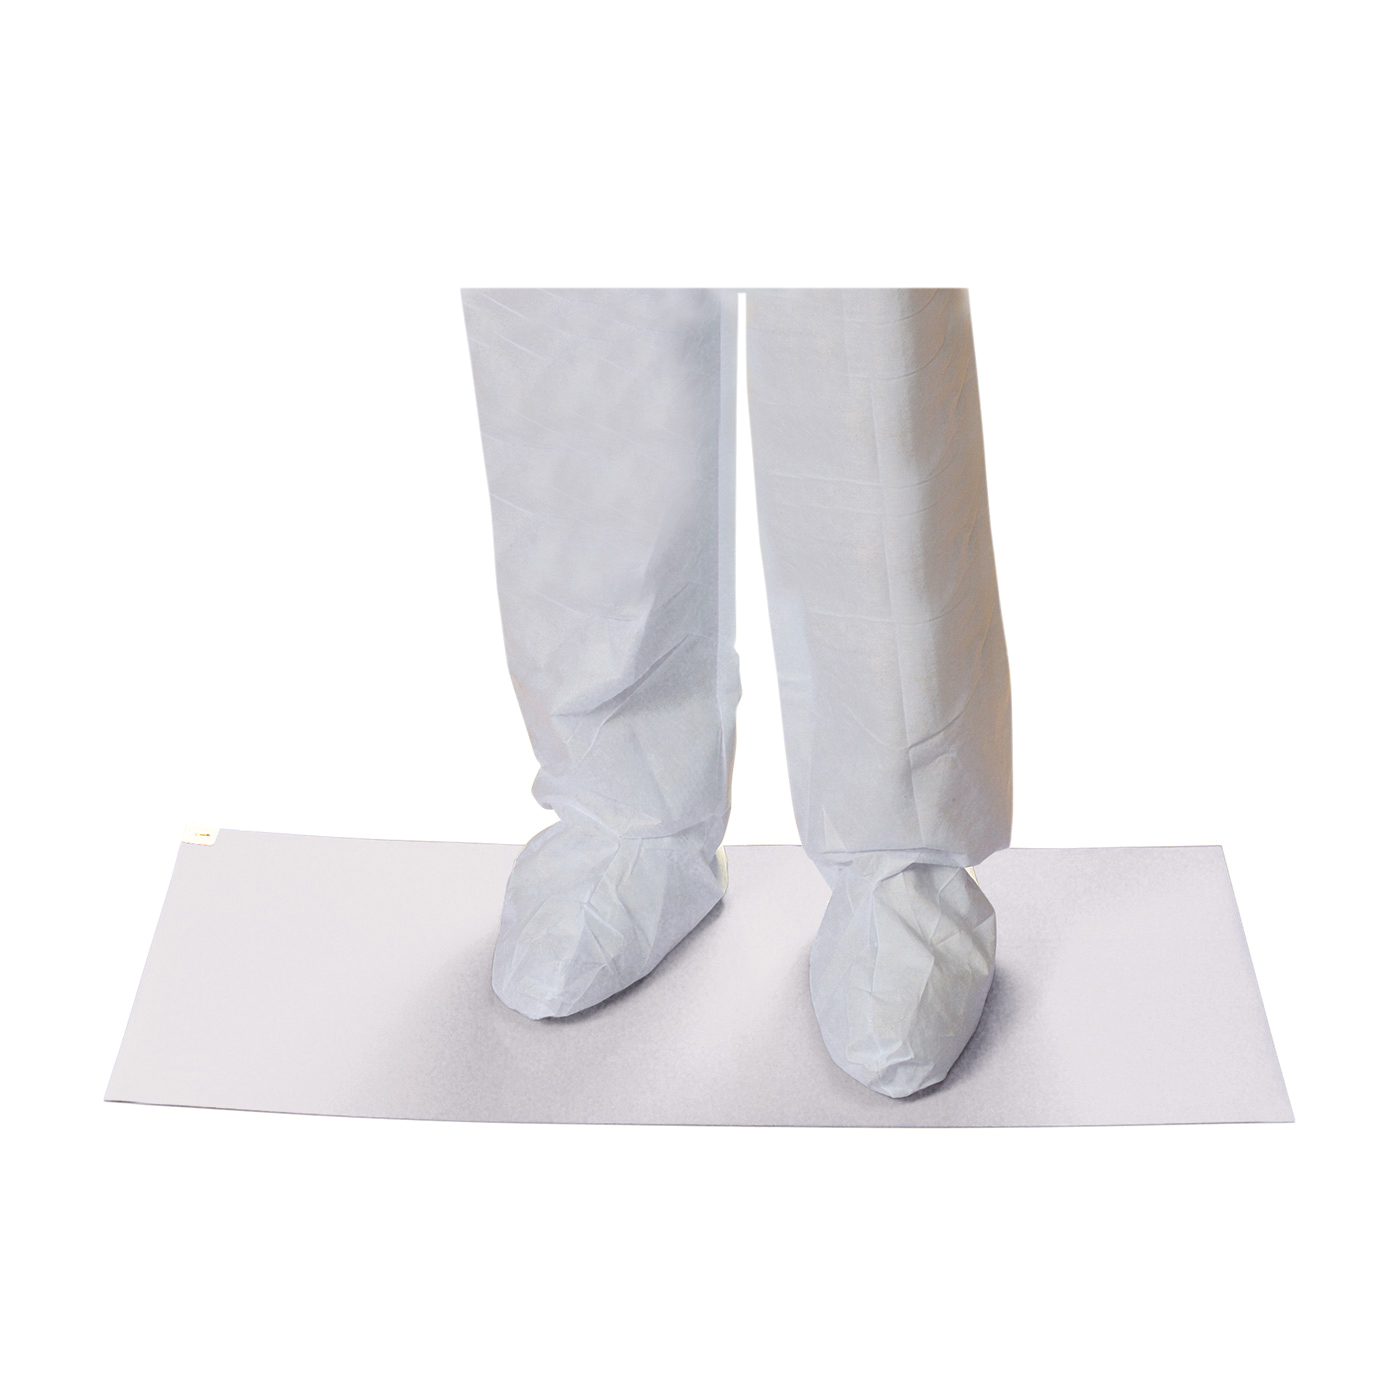 PIP® CleanTeam® 100-93-364564W Contamination Control Clean Room Mat, 45 in L x 36 in W x 0.05 mm THK, White, Polyethelene, 60 Sheets per Mat